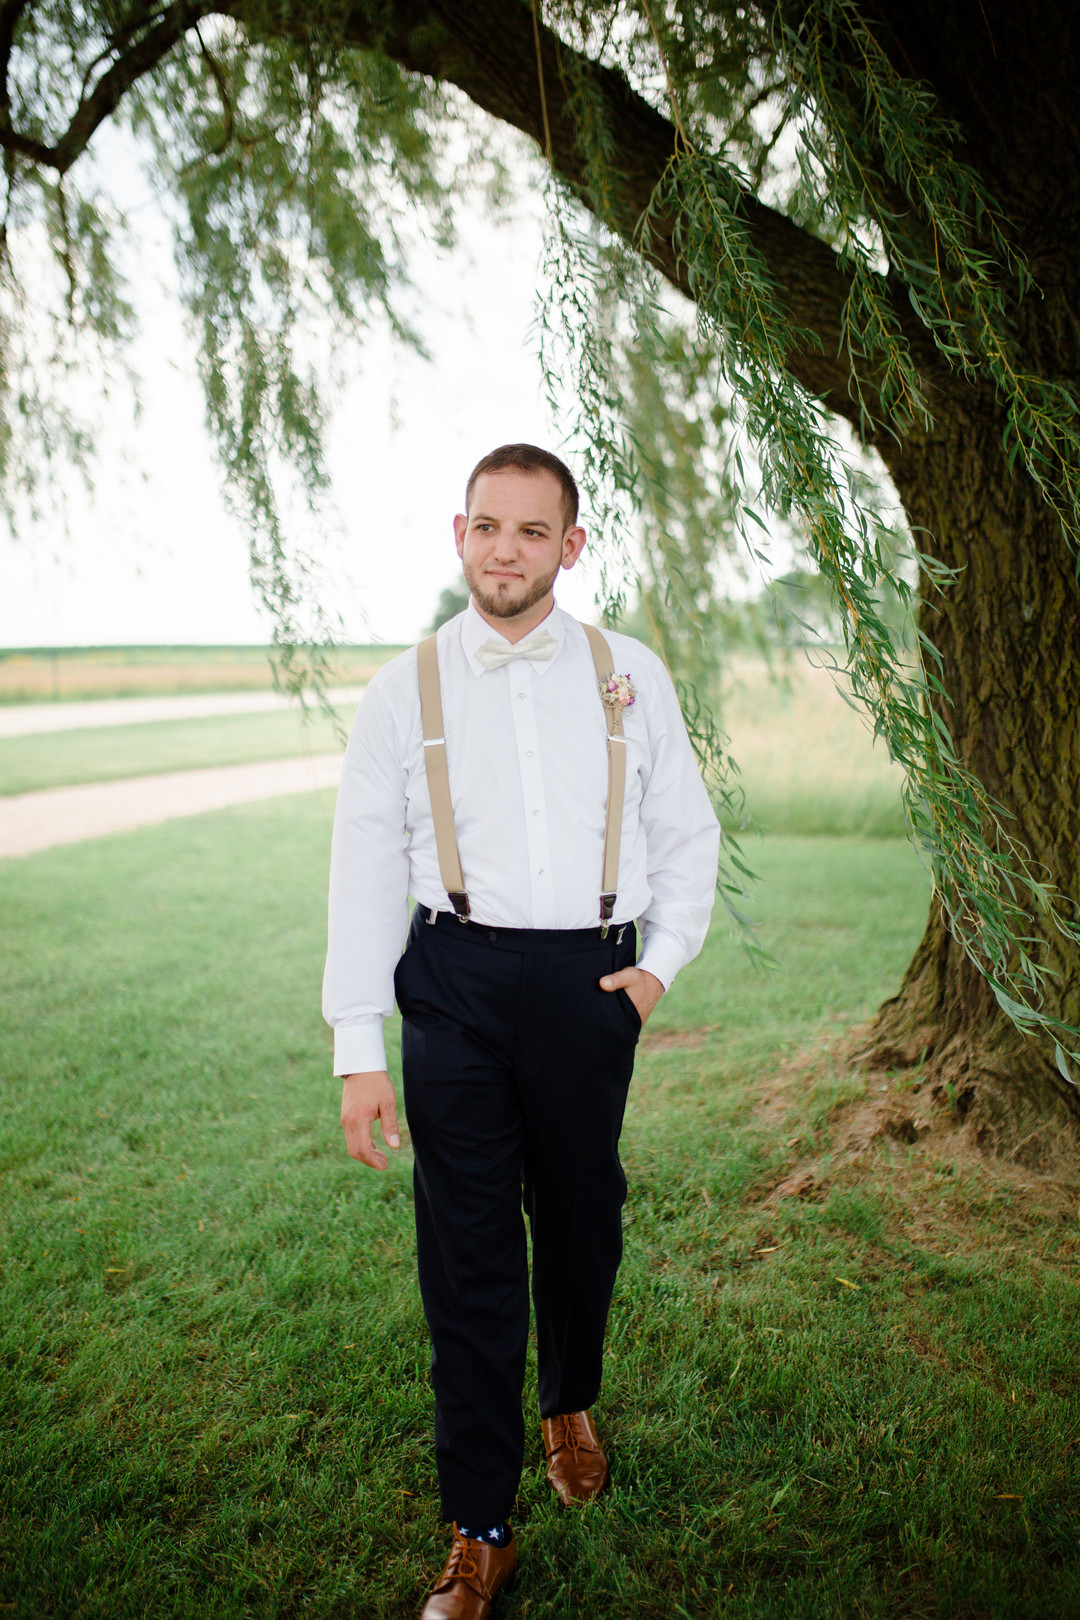 Grooms rustic wedding attire: Rustic country wedding in Minooka, IL captured by Katie Brsan Photography. Visit CHItheeWED.com for more wedding inspiration!